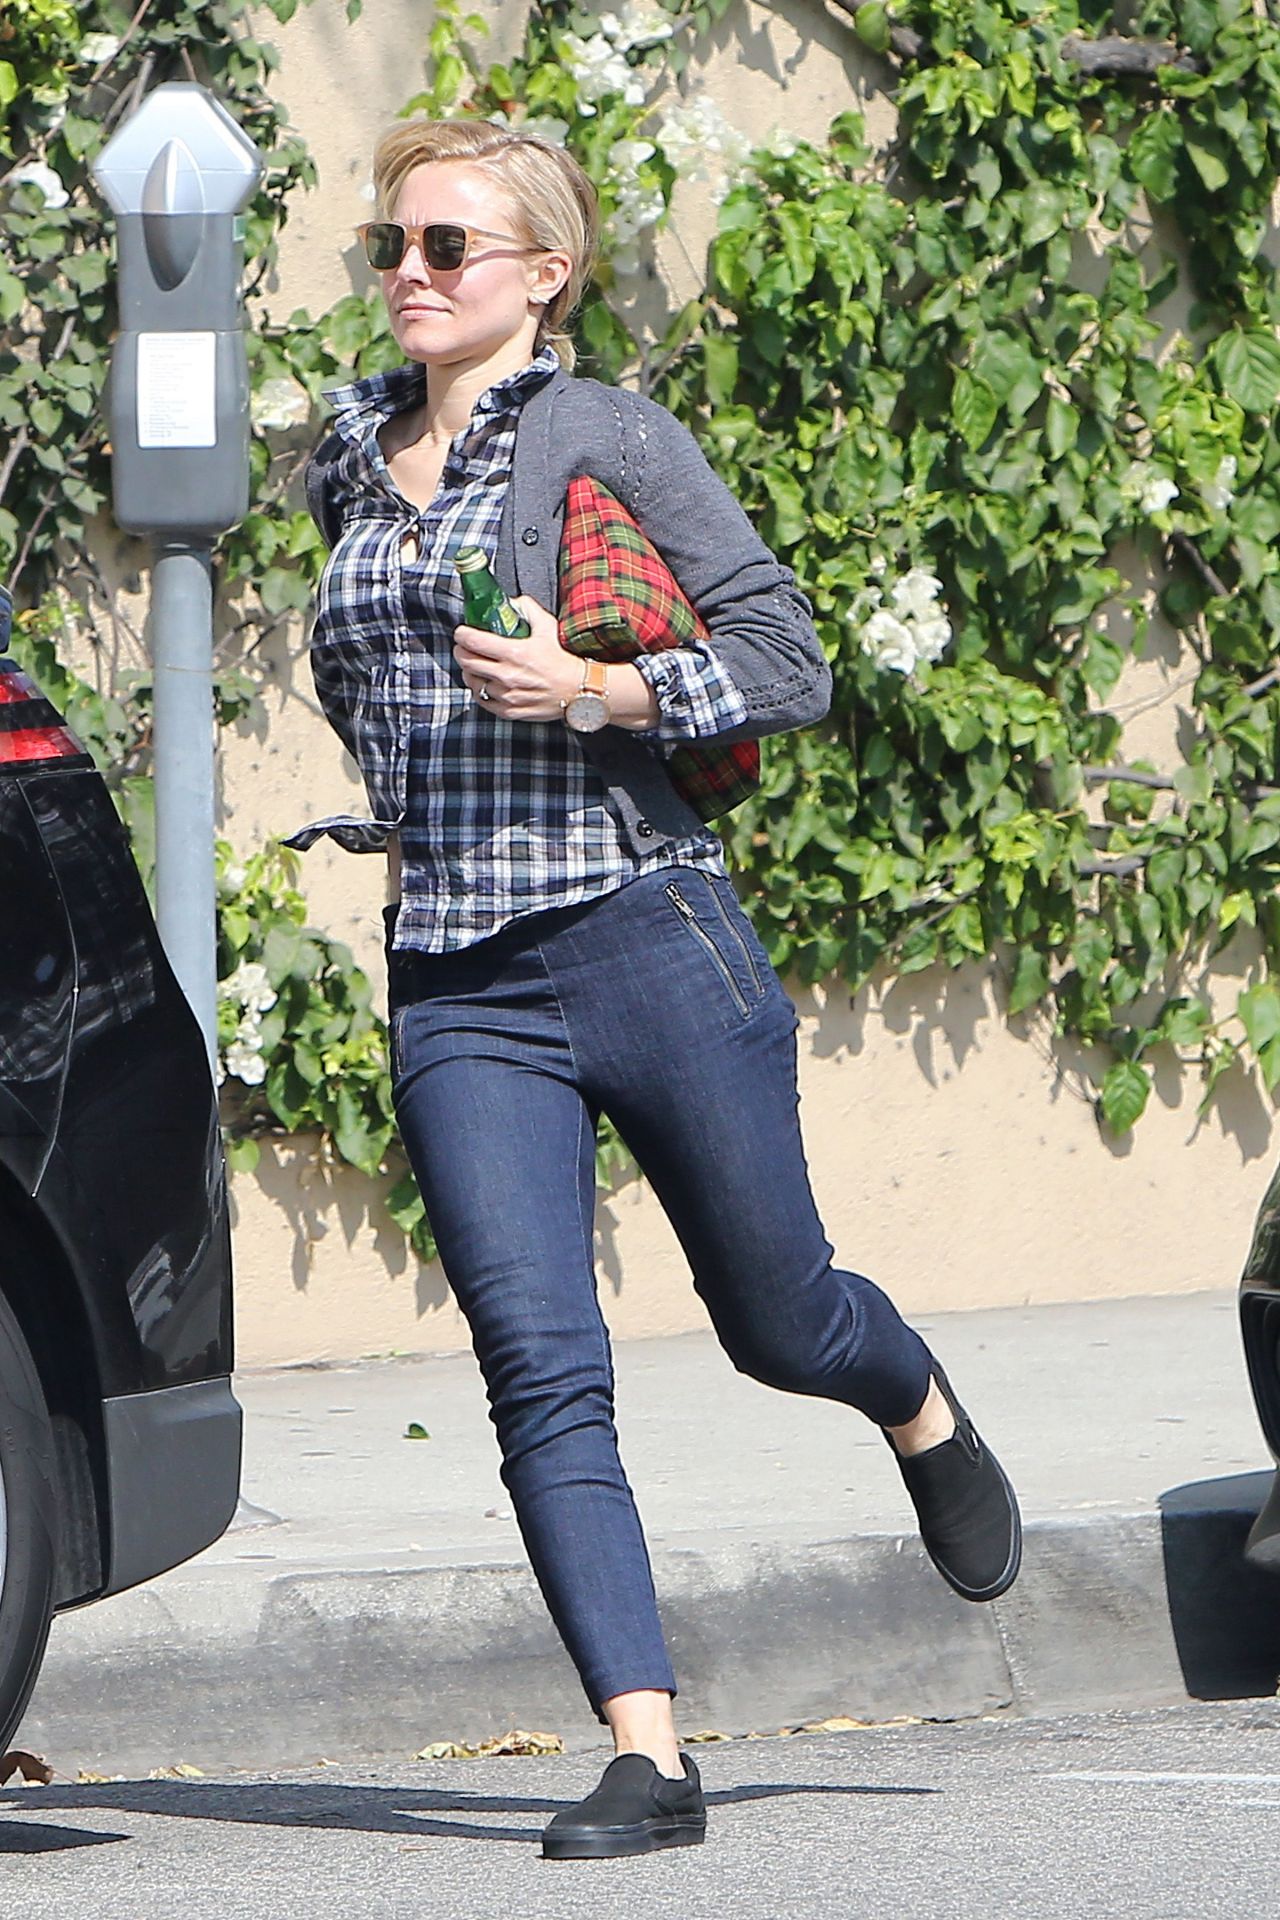 Kristen Bell in a Hurry - Out in Los Angeles, February 2014